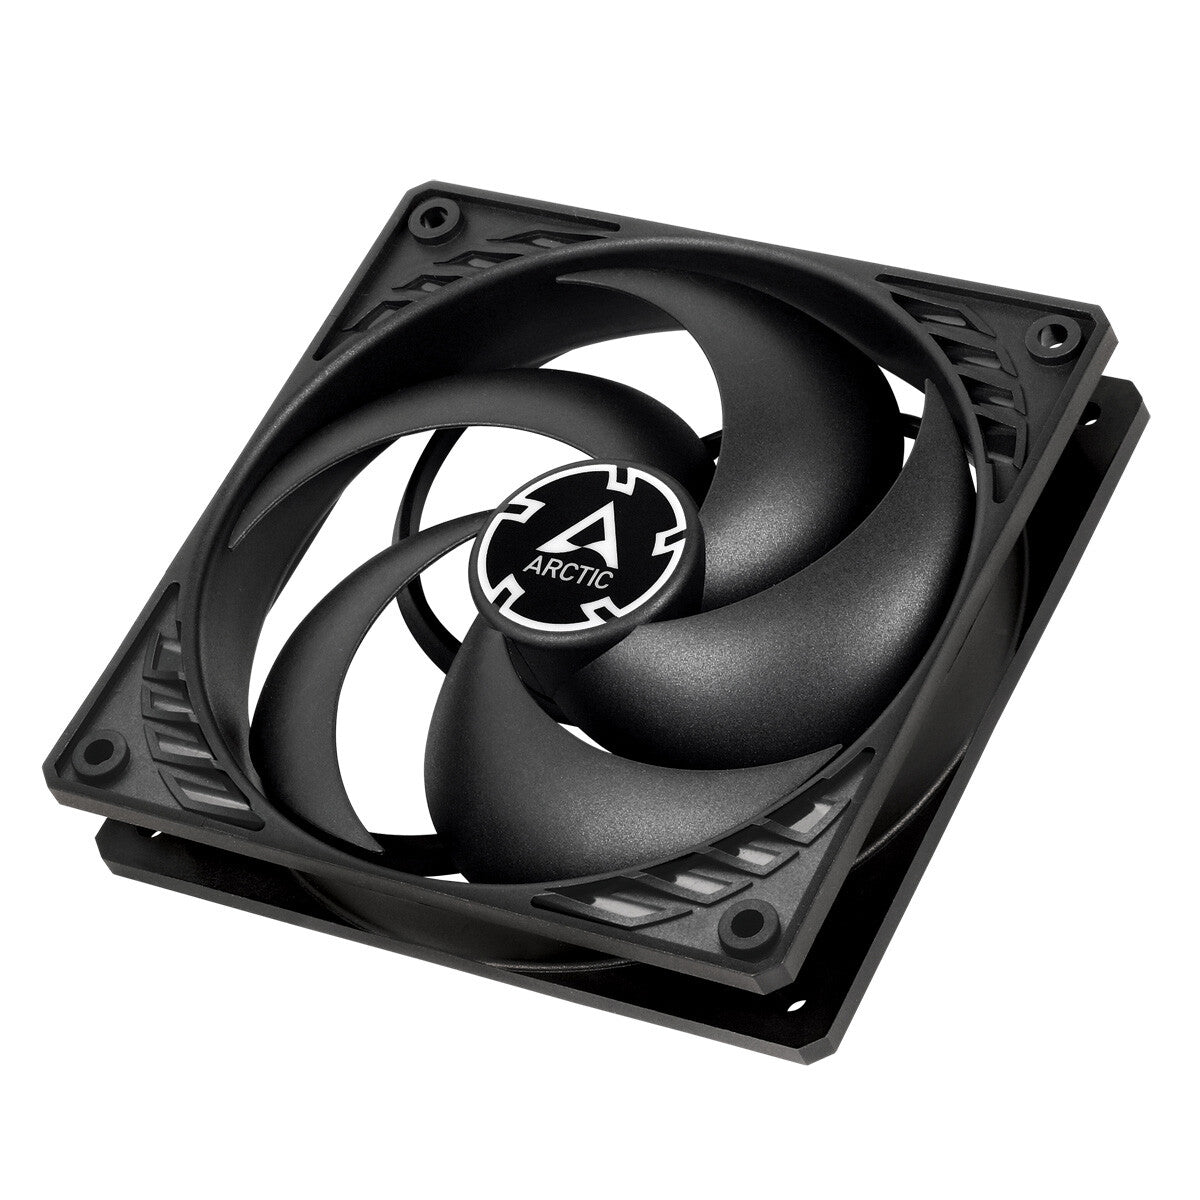 ARCTIC P12 PWM PST - Computer Case Fan in Black - 120mm (Pack of 5)